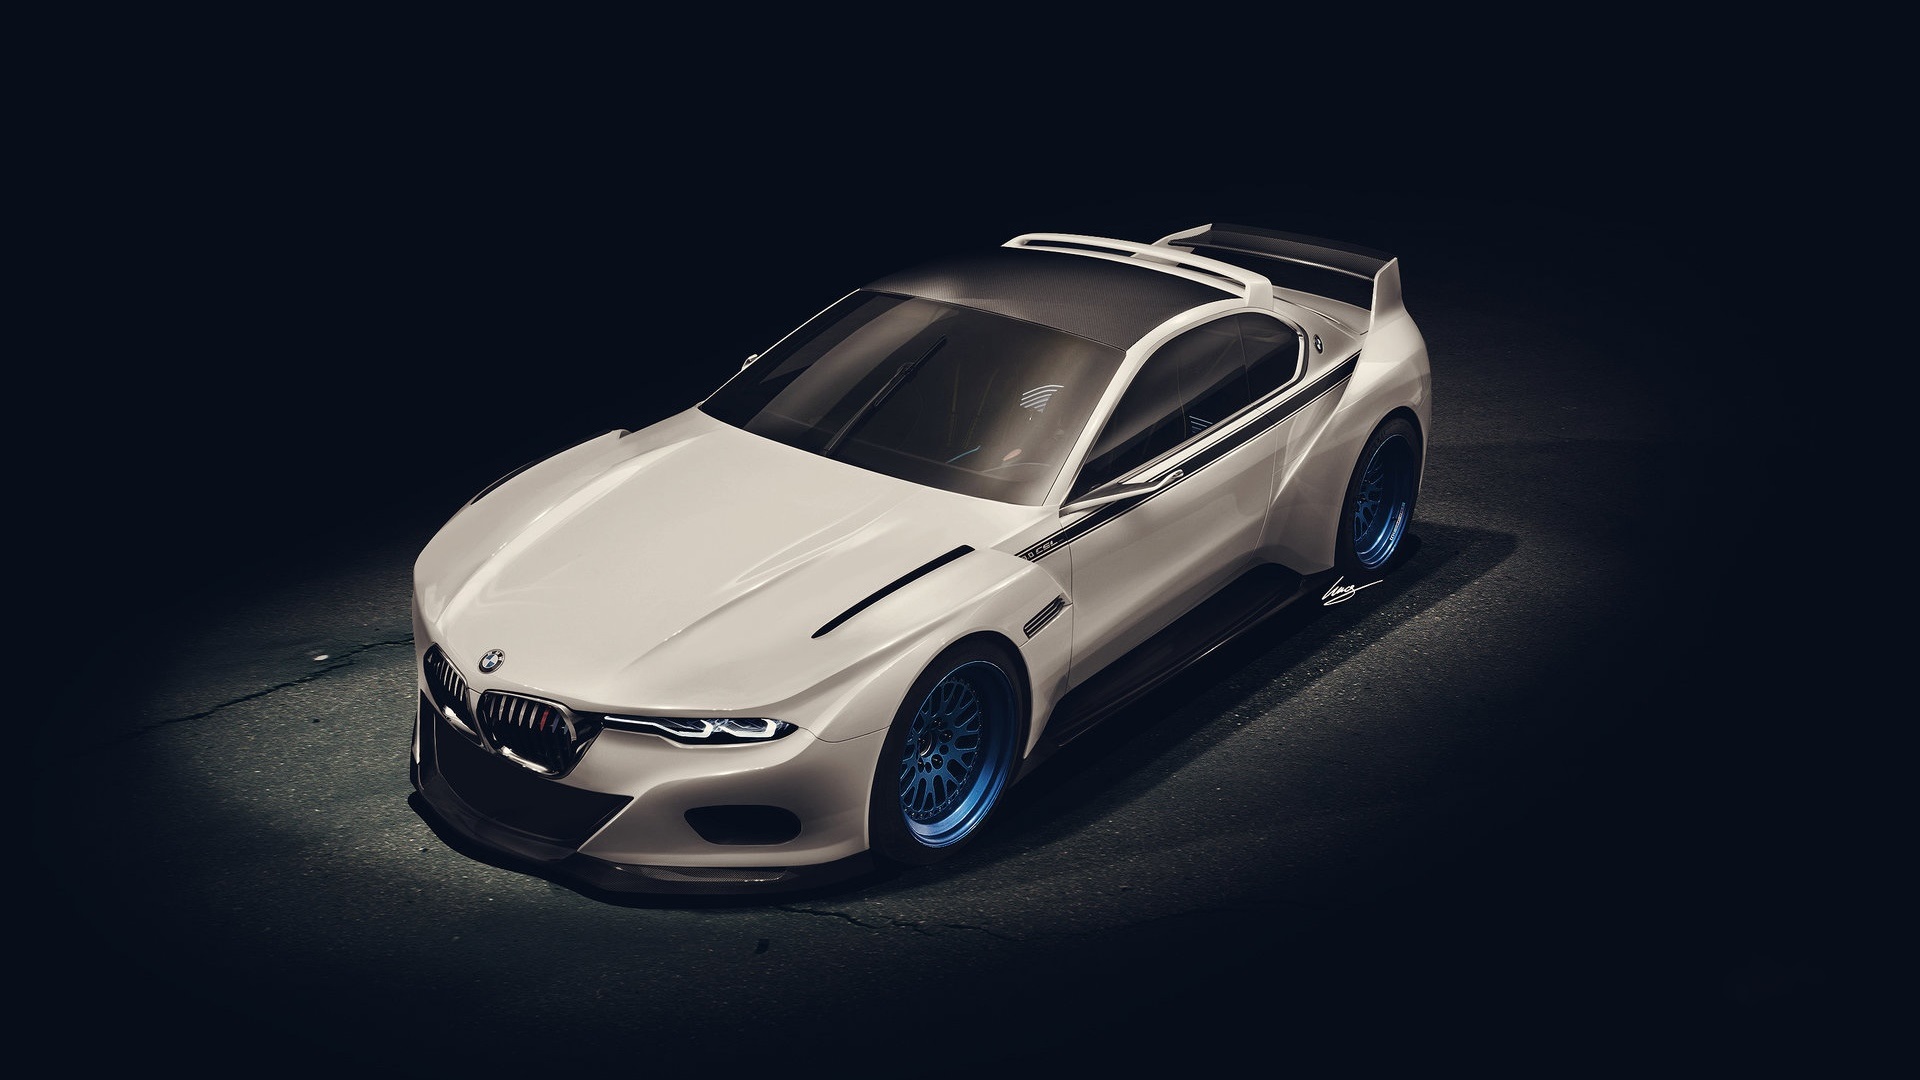 General 1920x1080 BMW car vehicle dark white cars BMW 3.0 CSL HOMMAGE modified photo manipulation colored wheels high angle simple background black background